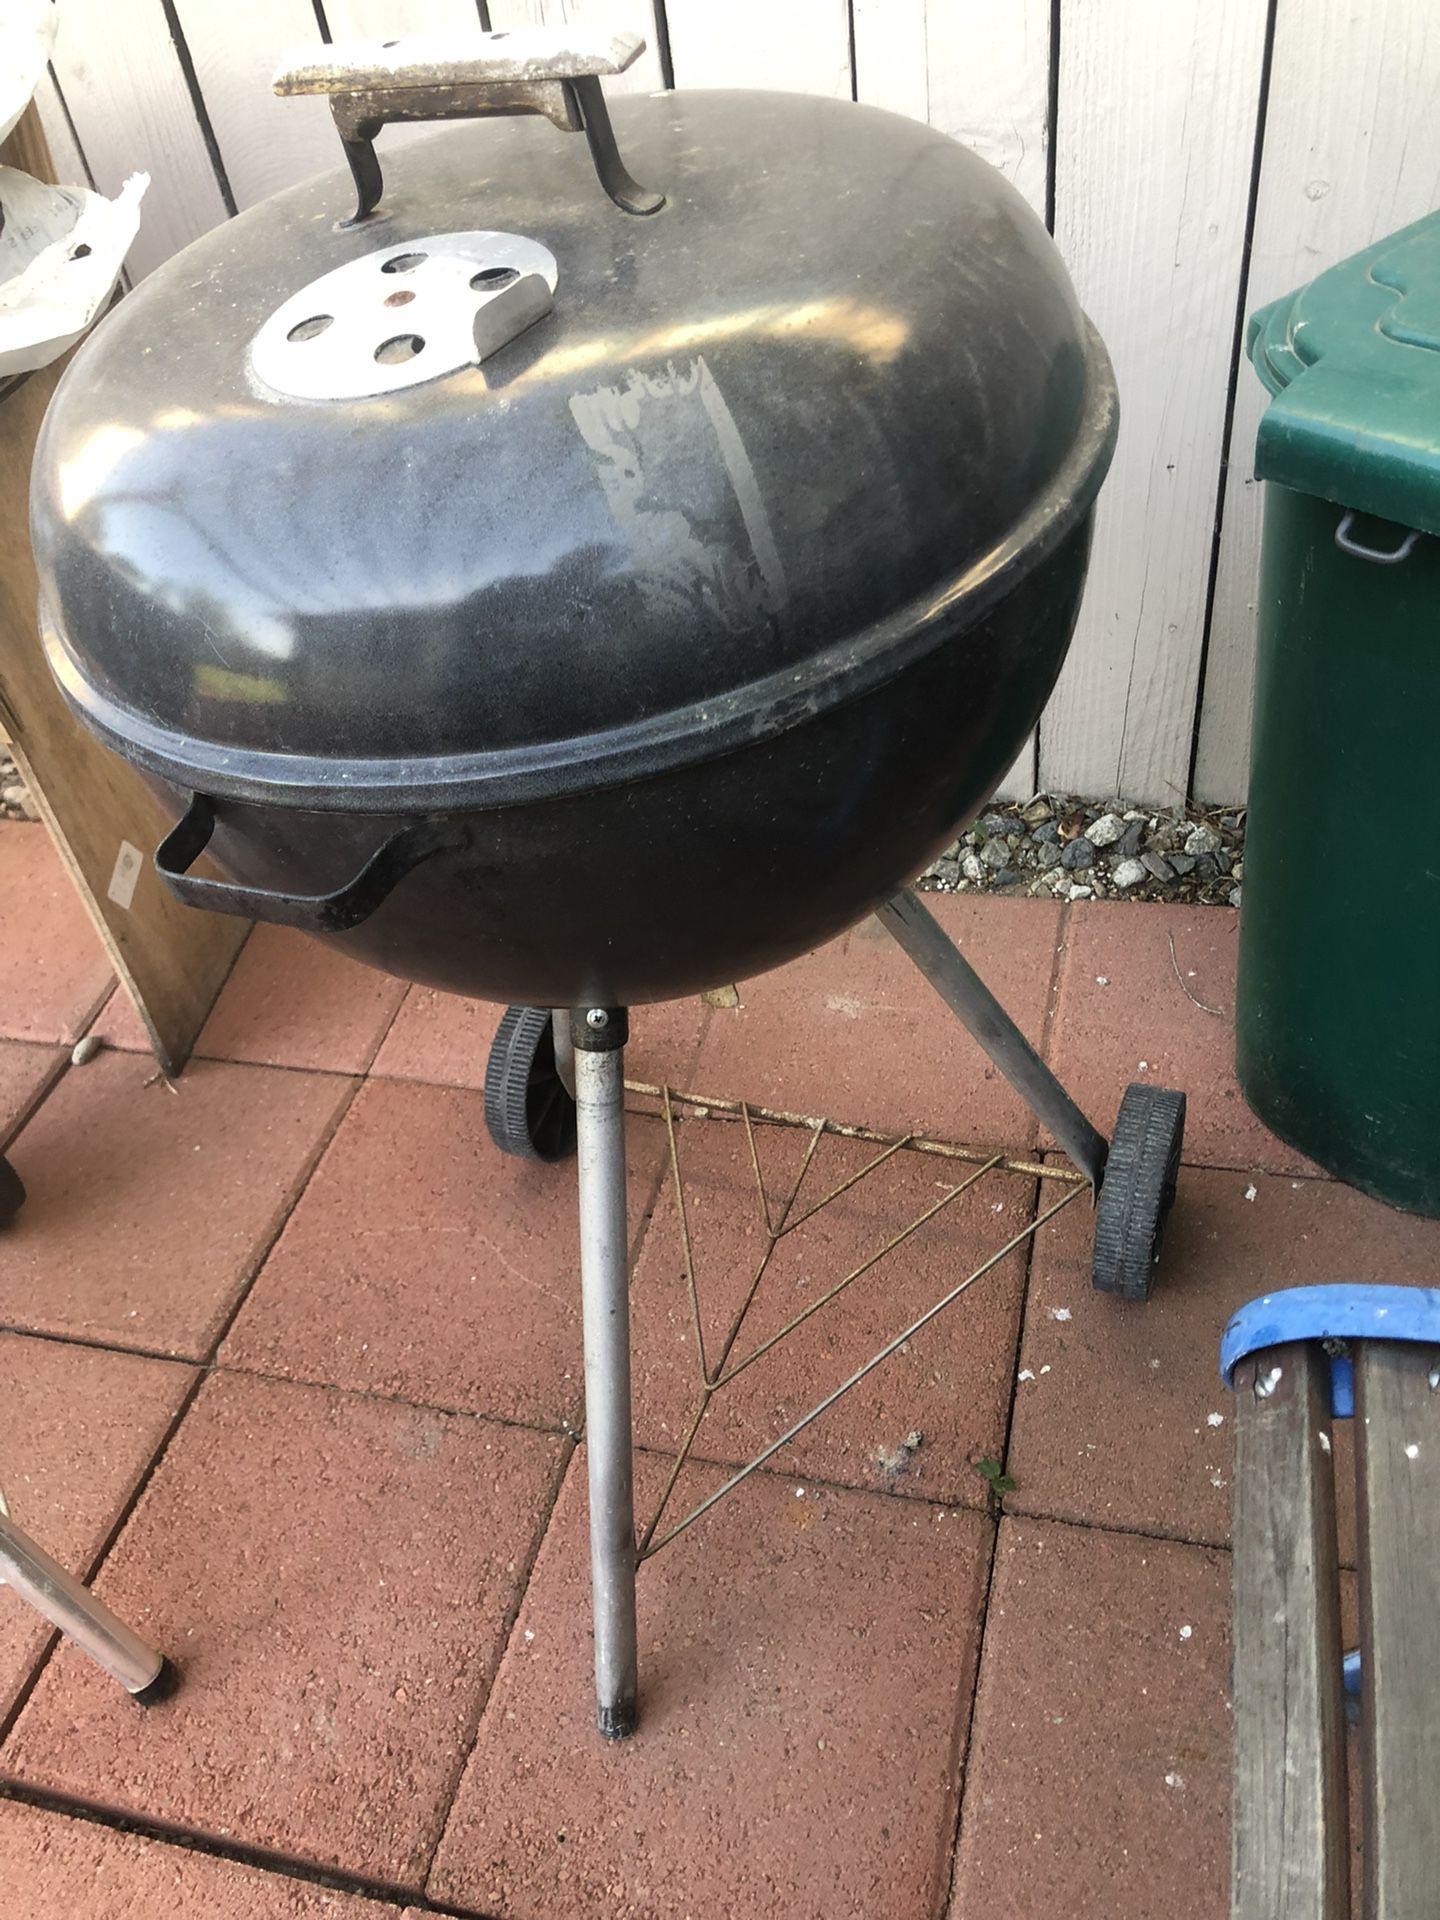 Weber Charcoal Grill In Great Working Condition Selling For $20!!!